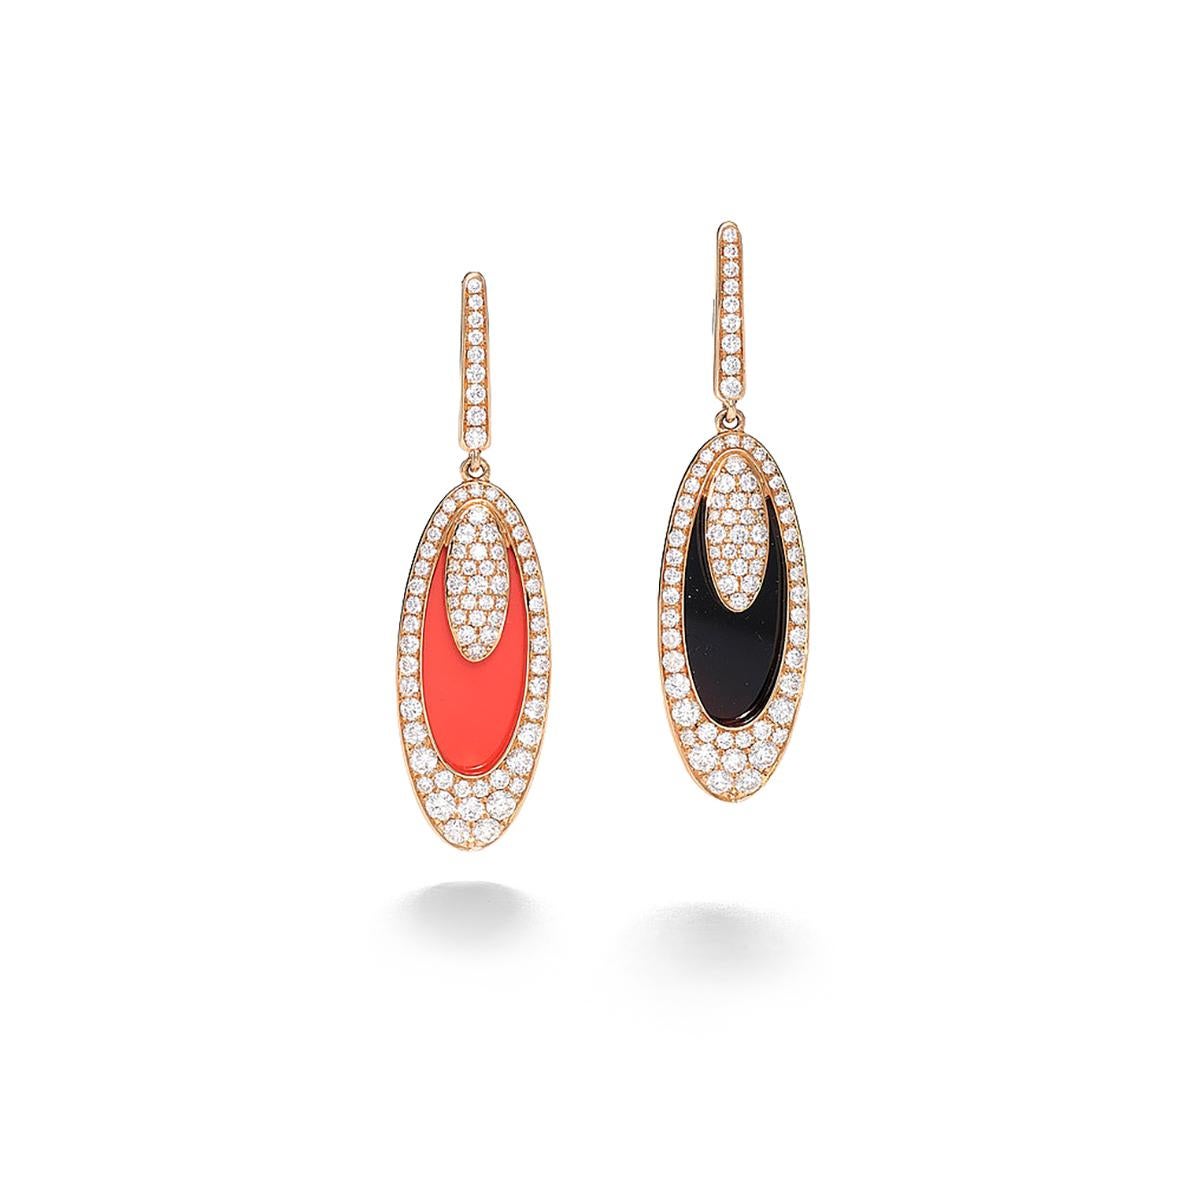 Earrings in 18kt pink gold set with 148 diamonds 1.93 cts, one coral 1.66 cts and one onyx 2.52cts    